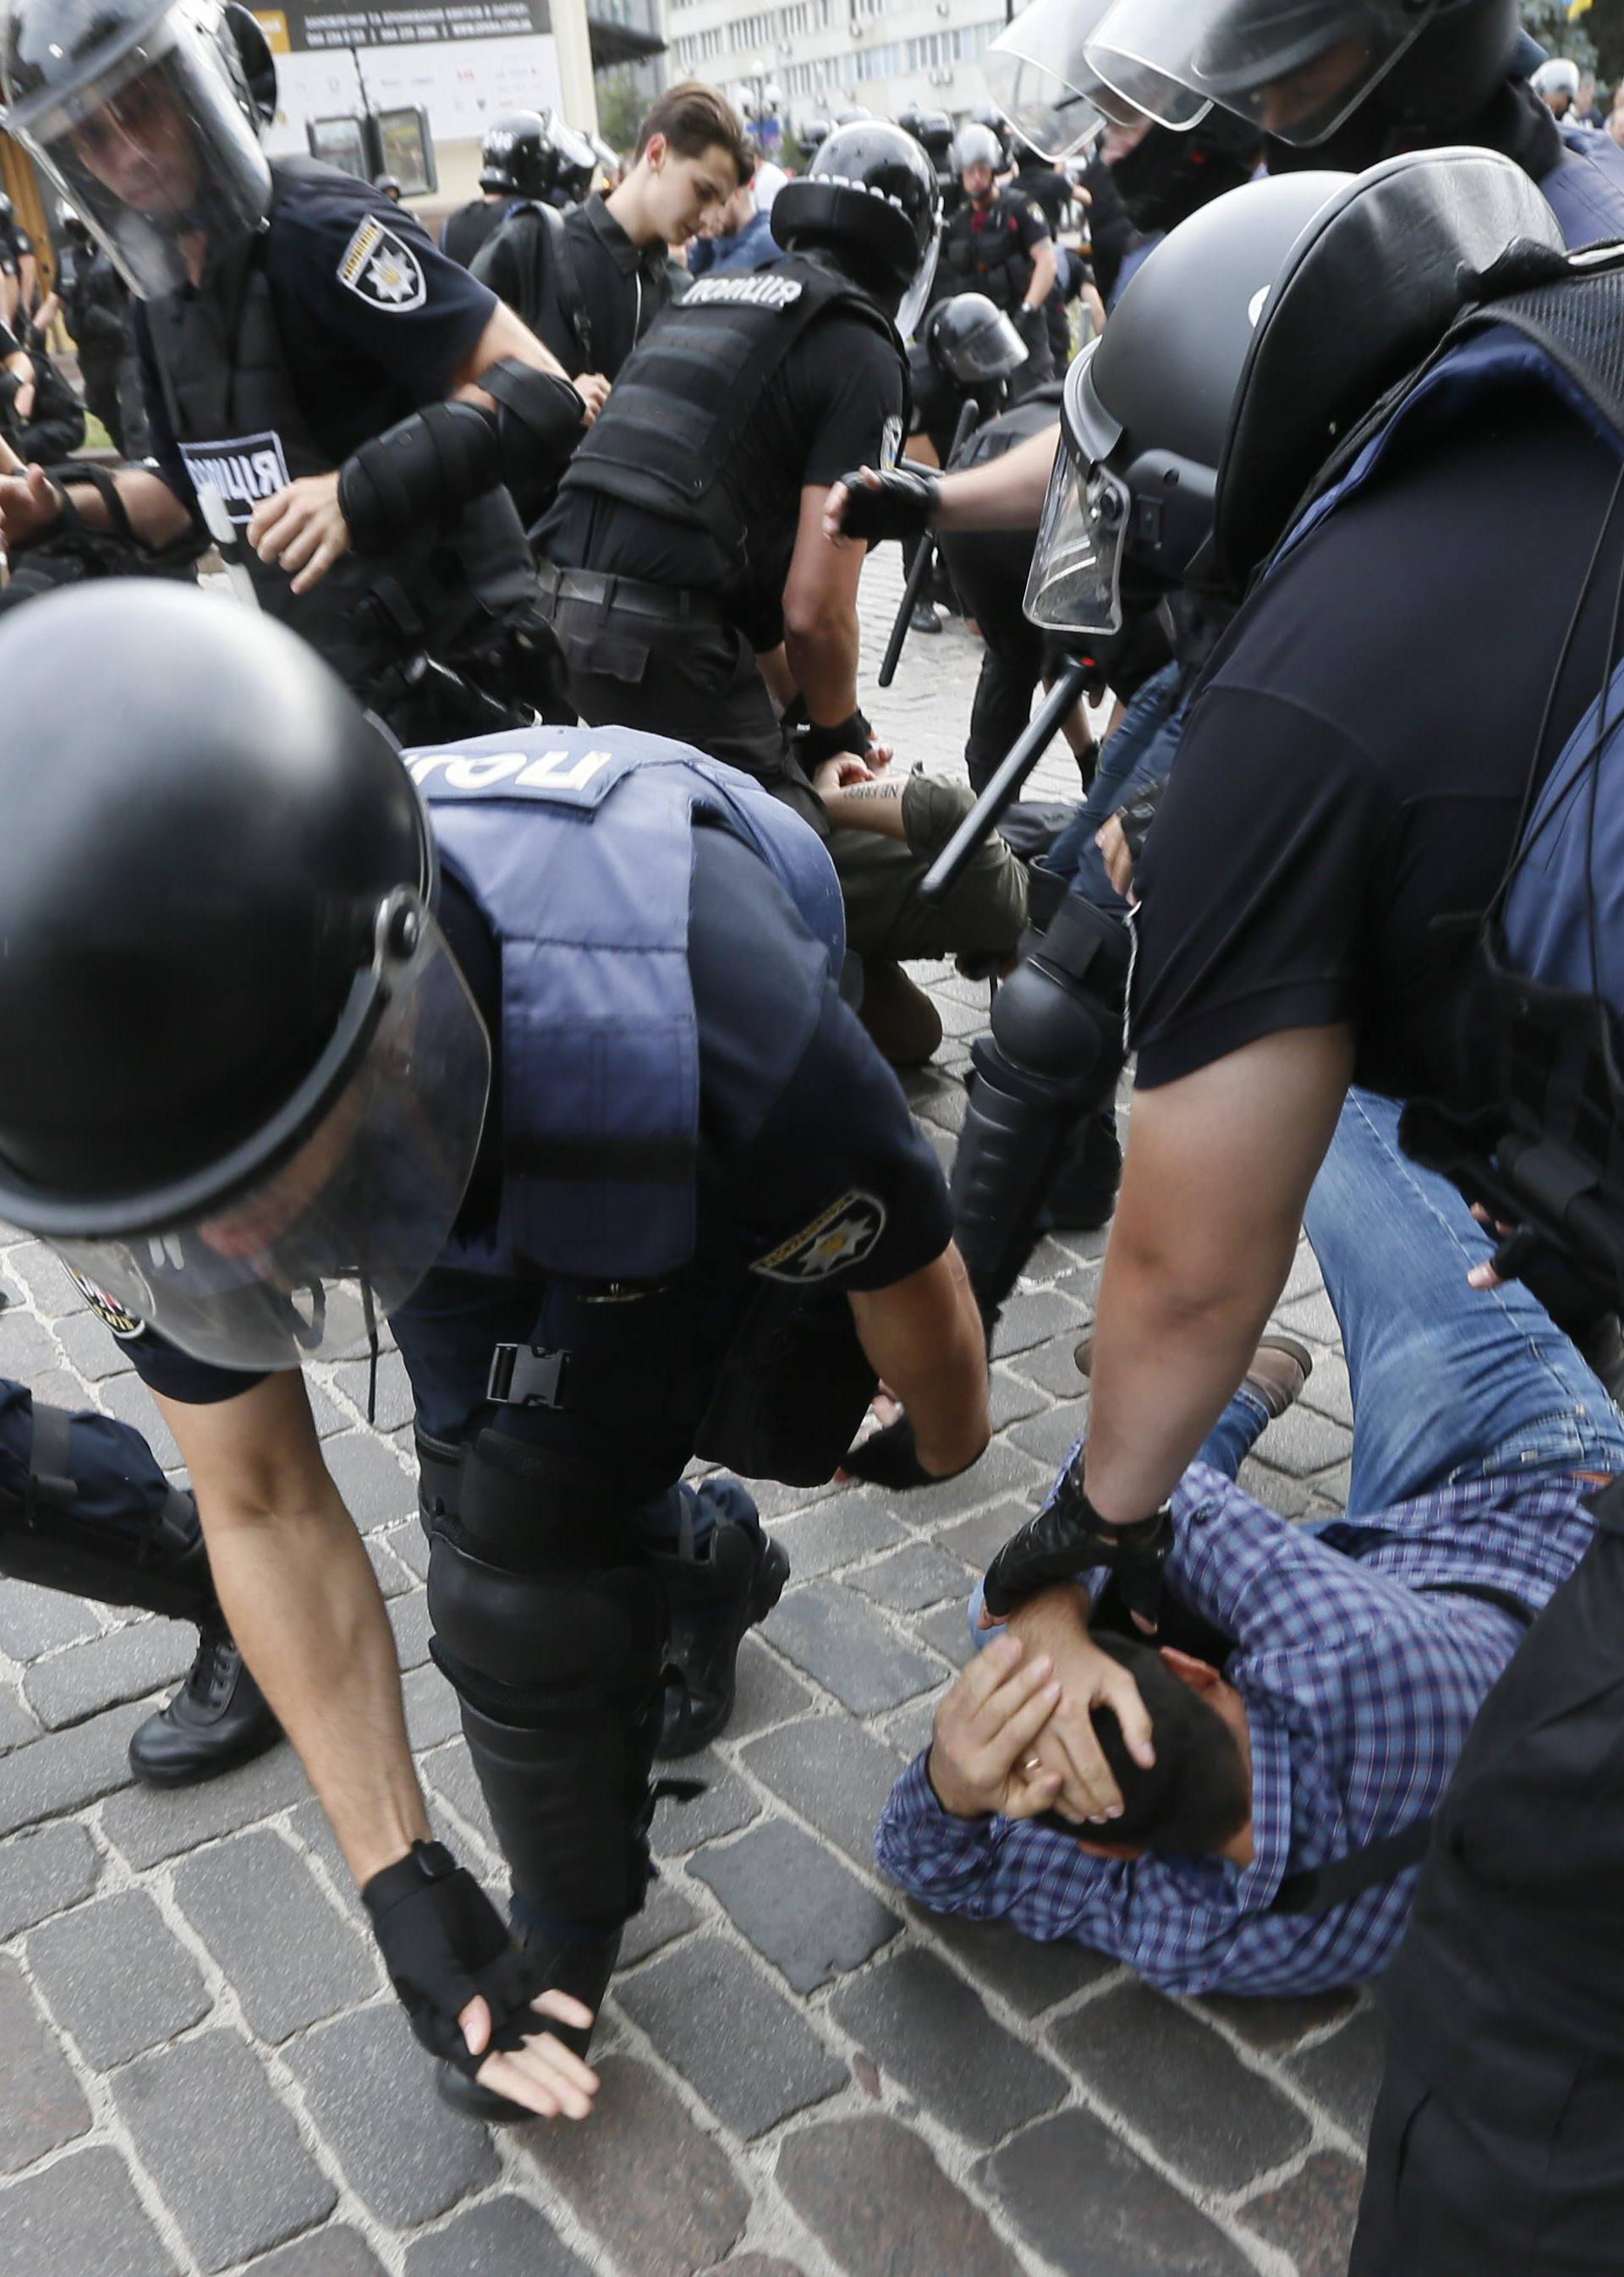 Riot police officers detain an anti-LGBT protesters during the Equality March in Kiev